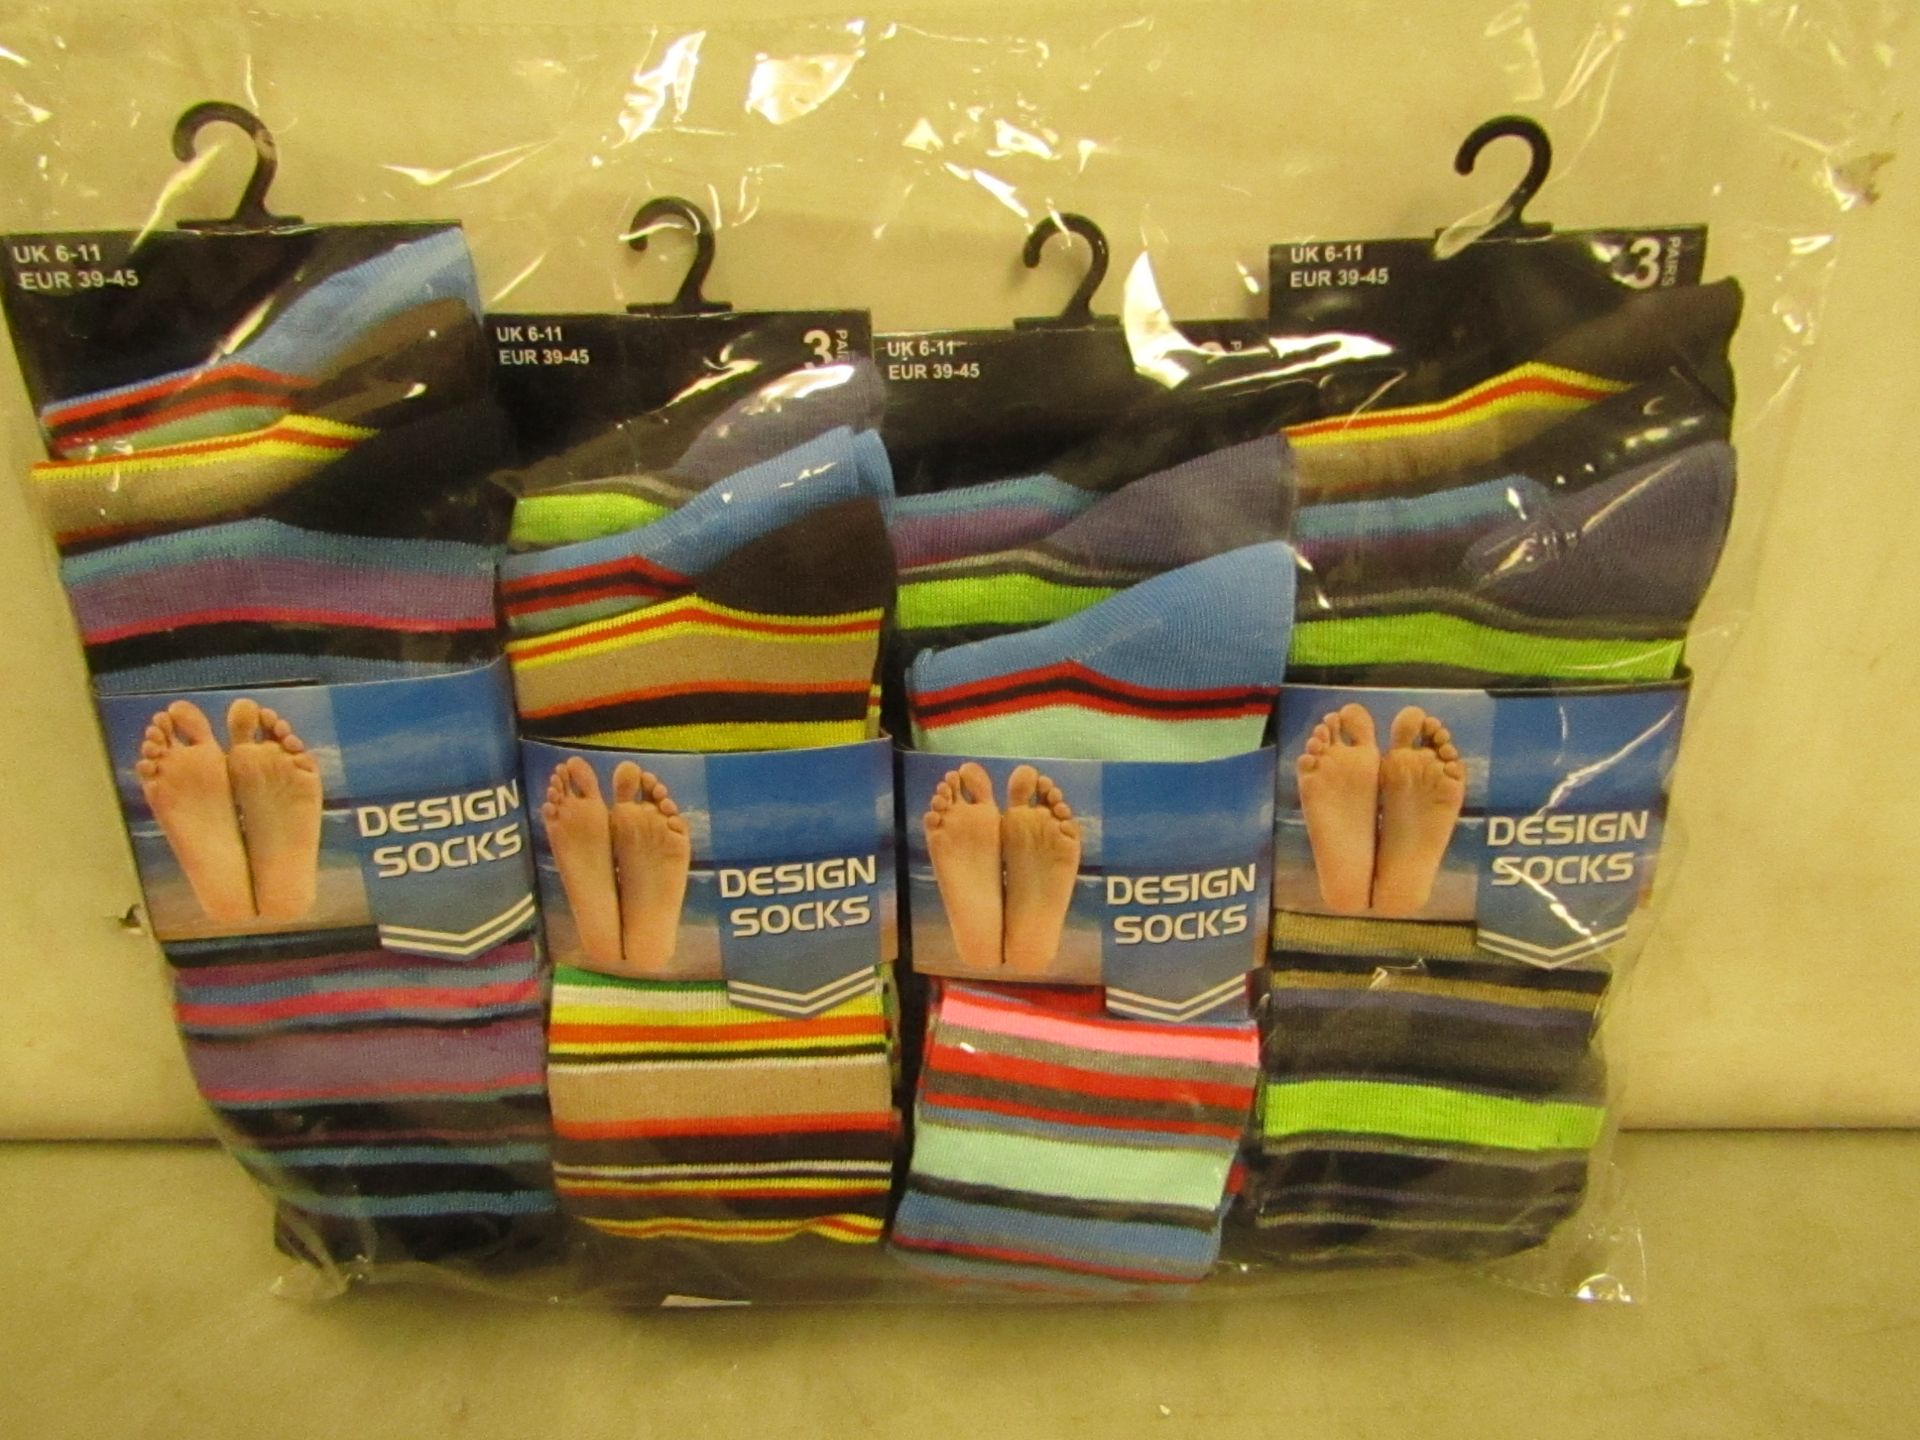 12 X Pairs of Mens Design Socks Size 6-11 New & Packaged